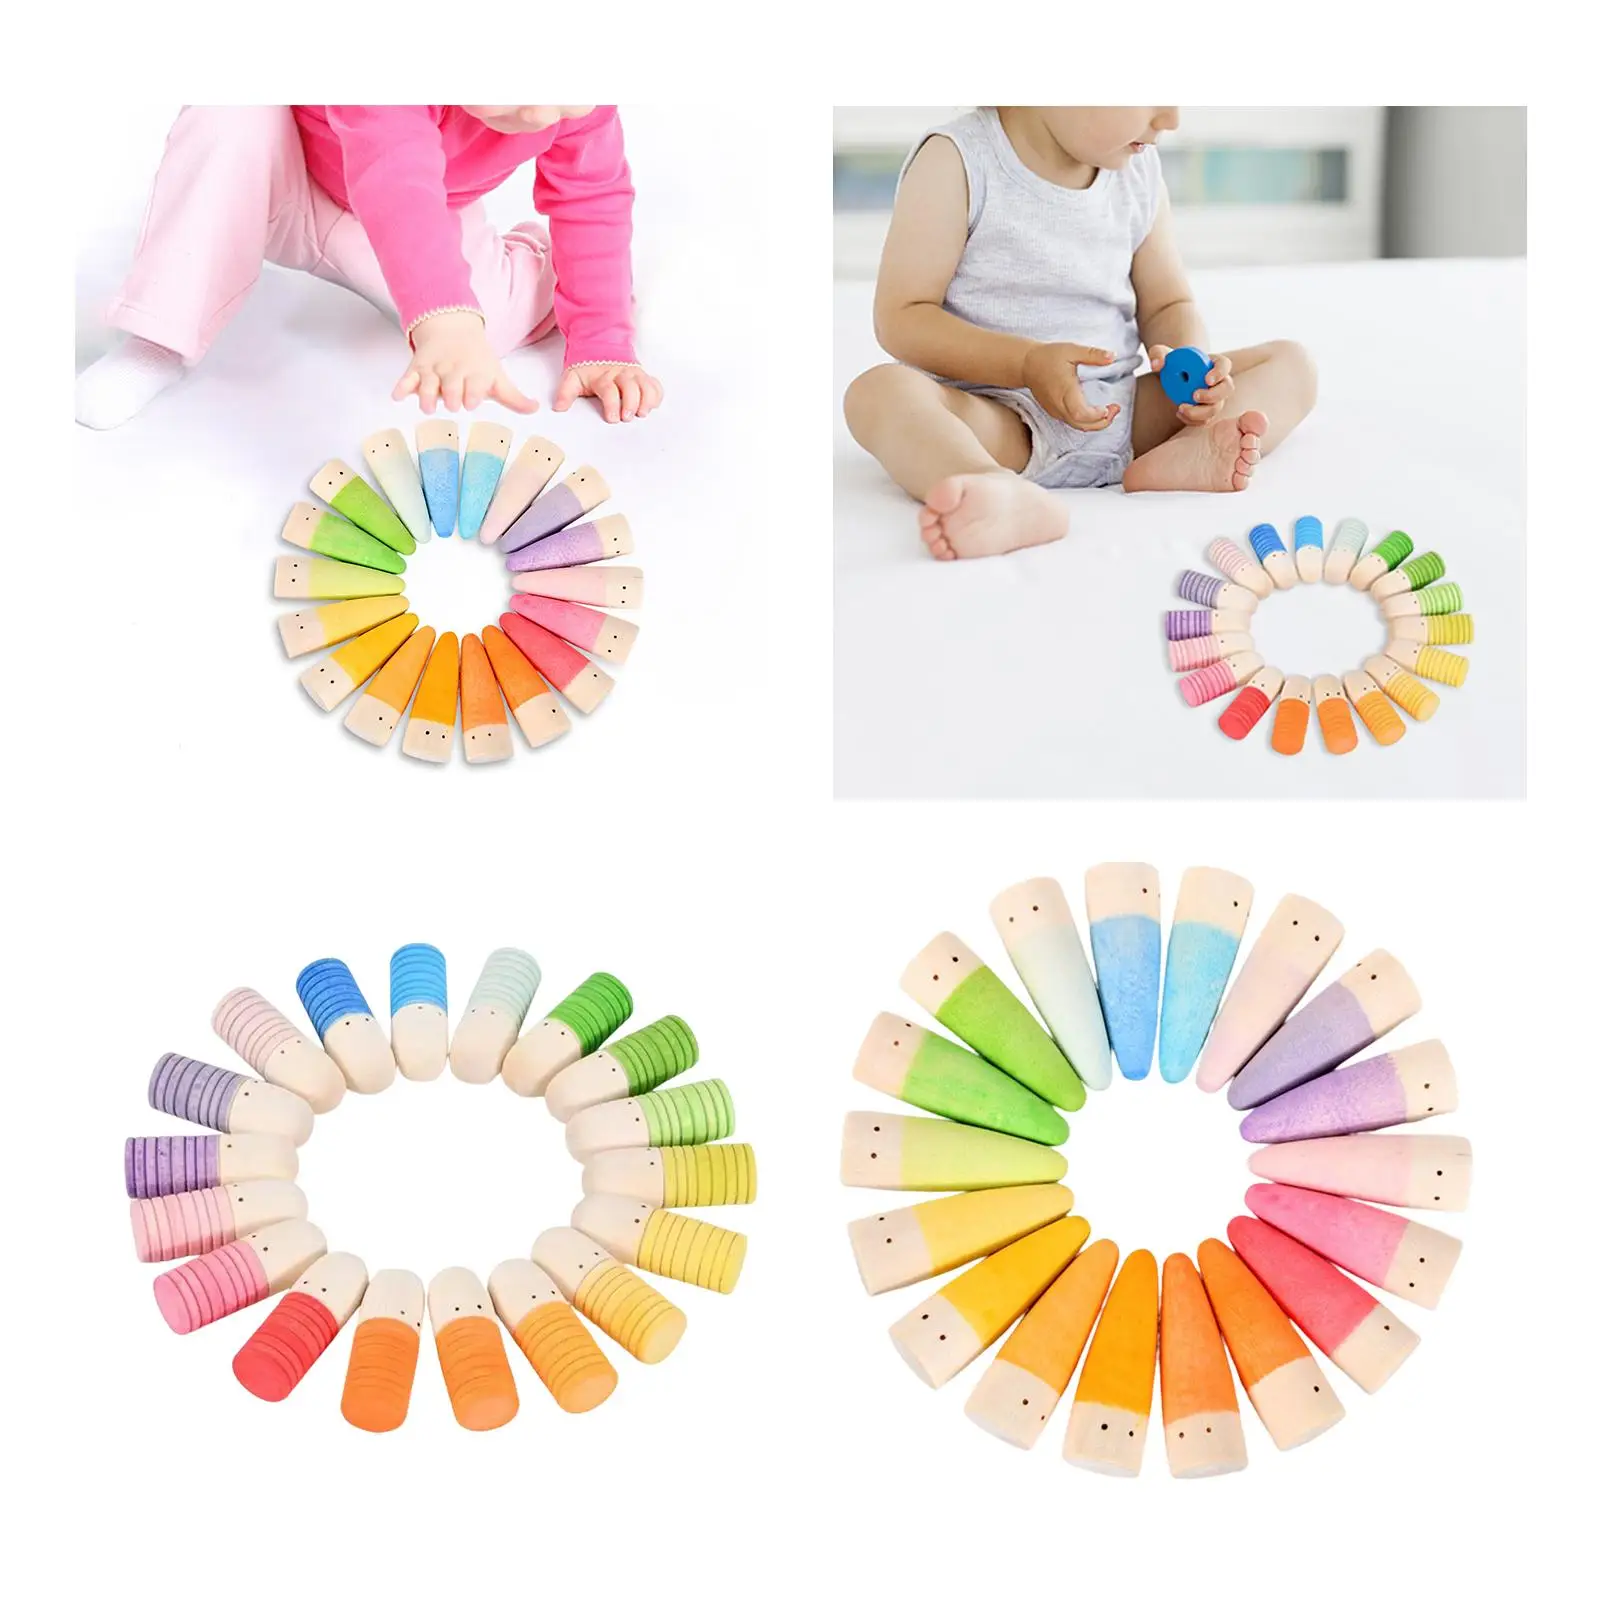 18Pcs Peg People Figures Toys Training Logical Thinking Color Classification Rainbow Peg Dolls for Toddlers for Children Kids